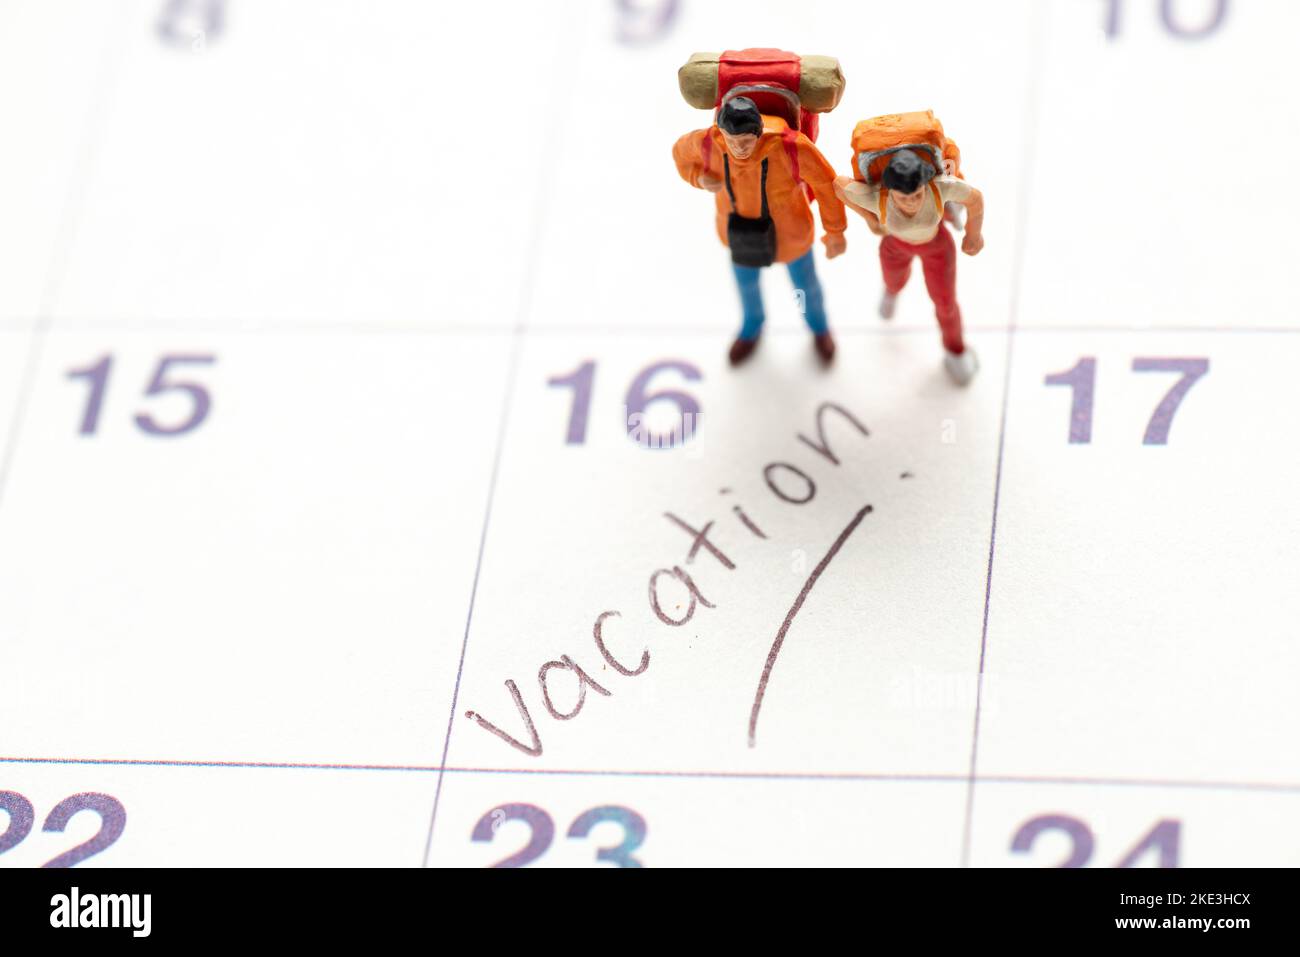 Miniature toys concept of a couple going for holidays or vacation Stock Photo